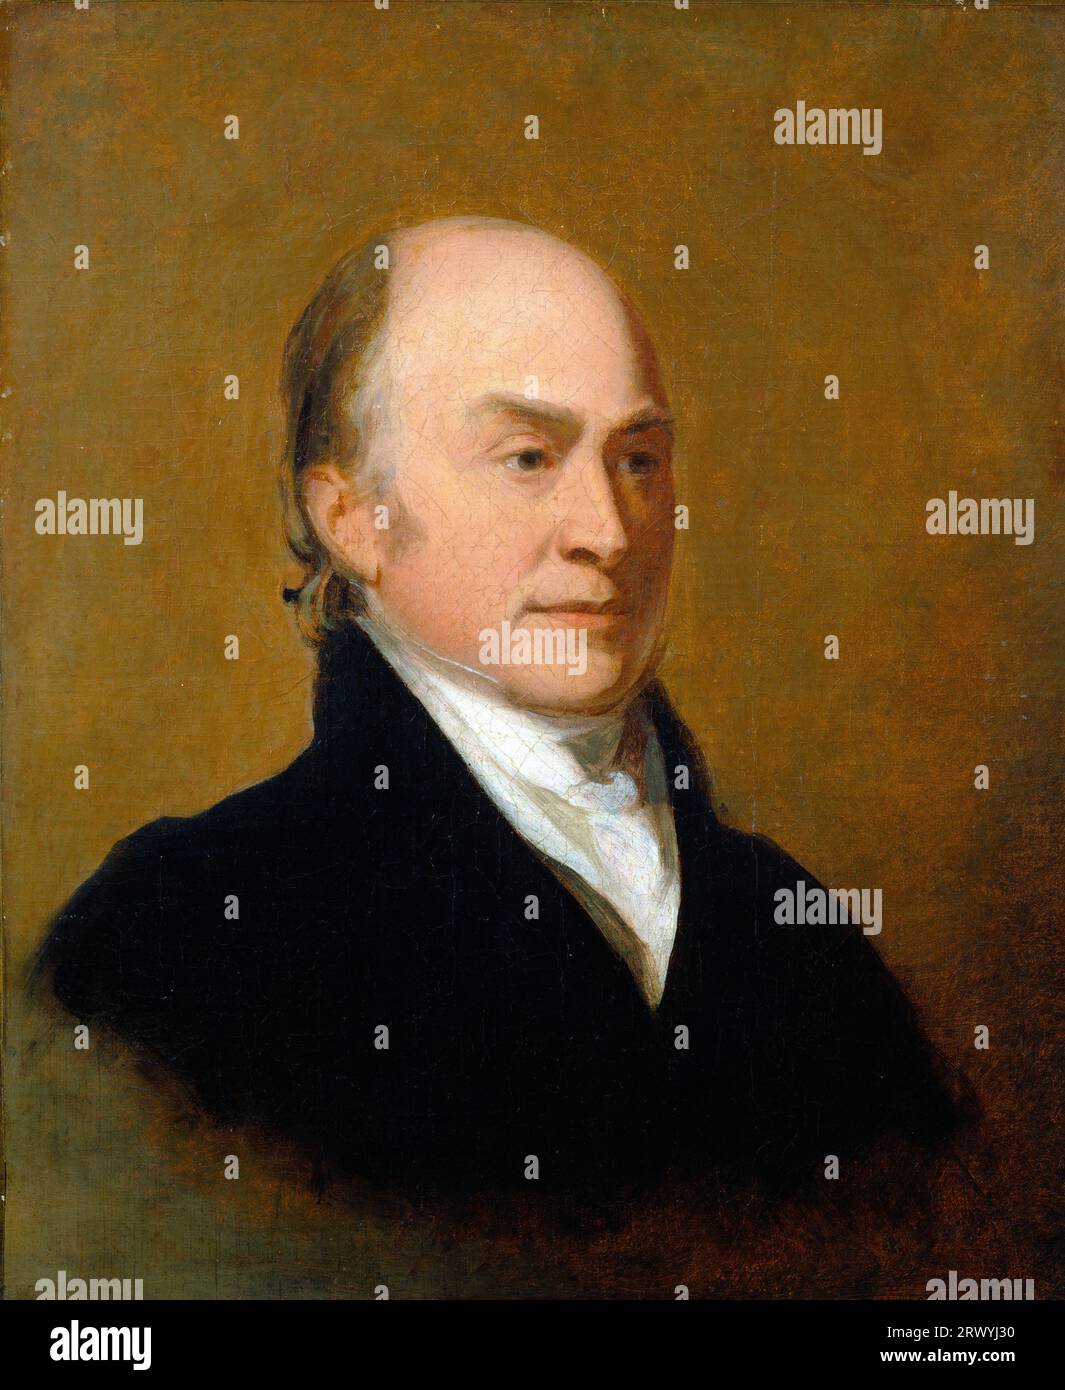 John Quincy Adams (1767 – 1848) American statesman, politician and  sixth president of the United States, from 1825 to 1829.  Painting of John Quincy Adams by Thomas Sully Stock Photo